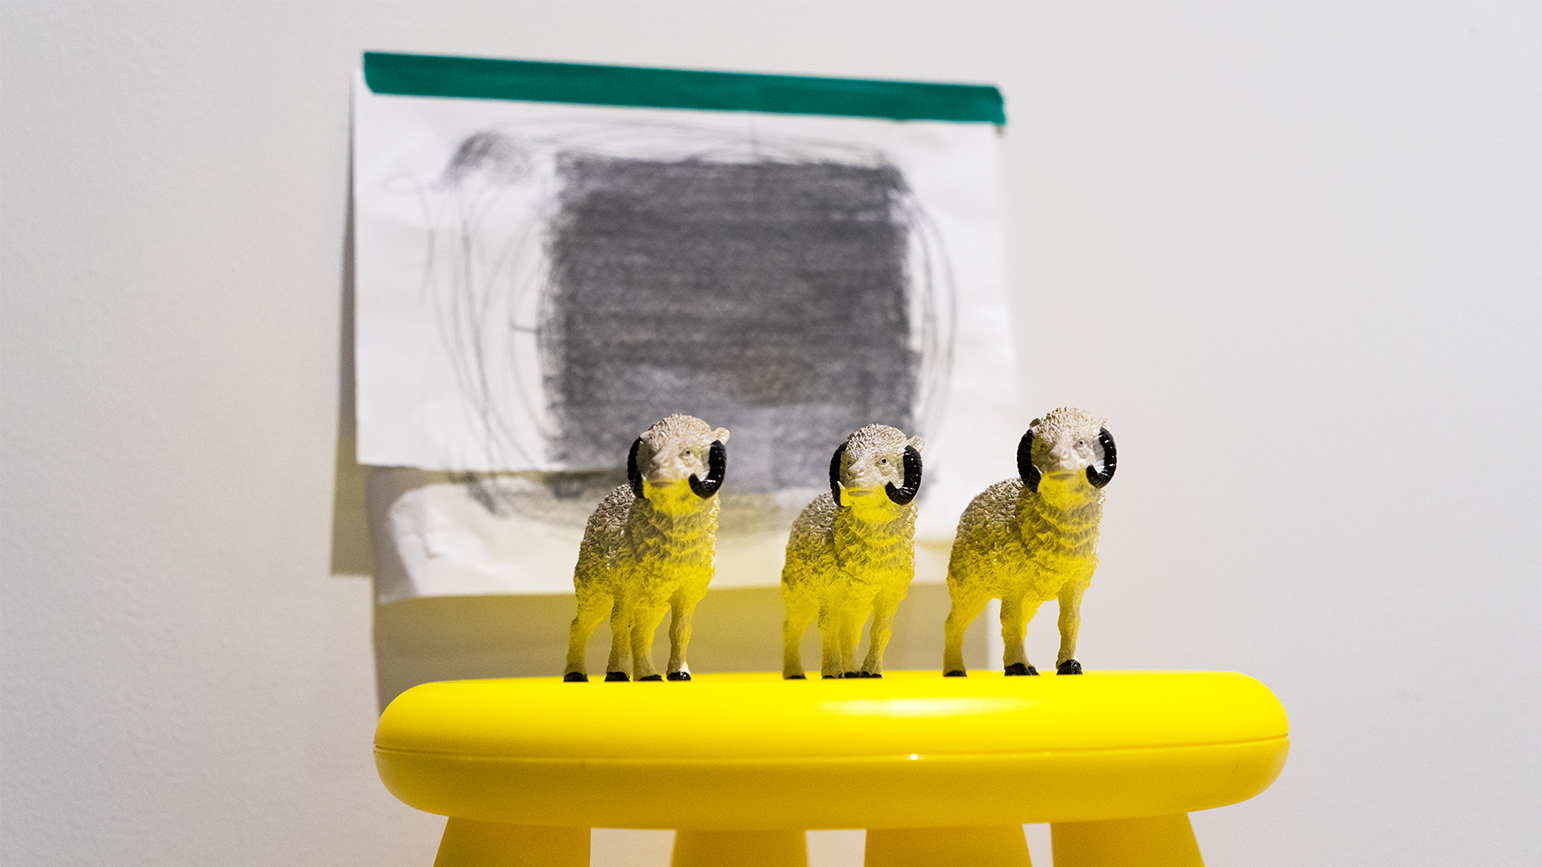 Three ram figurines on a stool with a drawing of a square taped on the wall behind